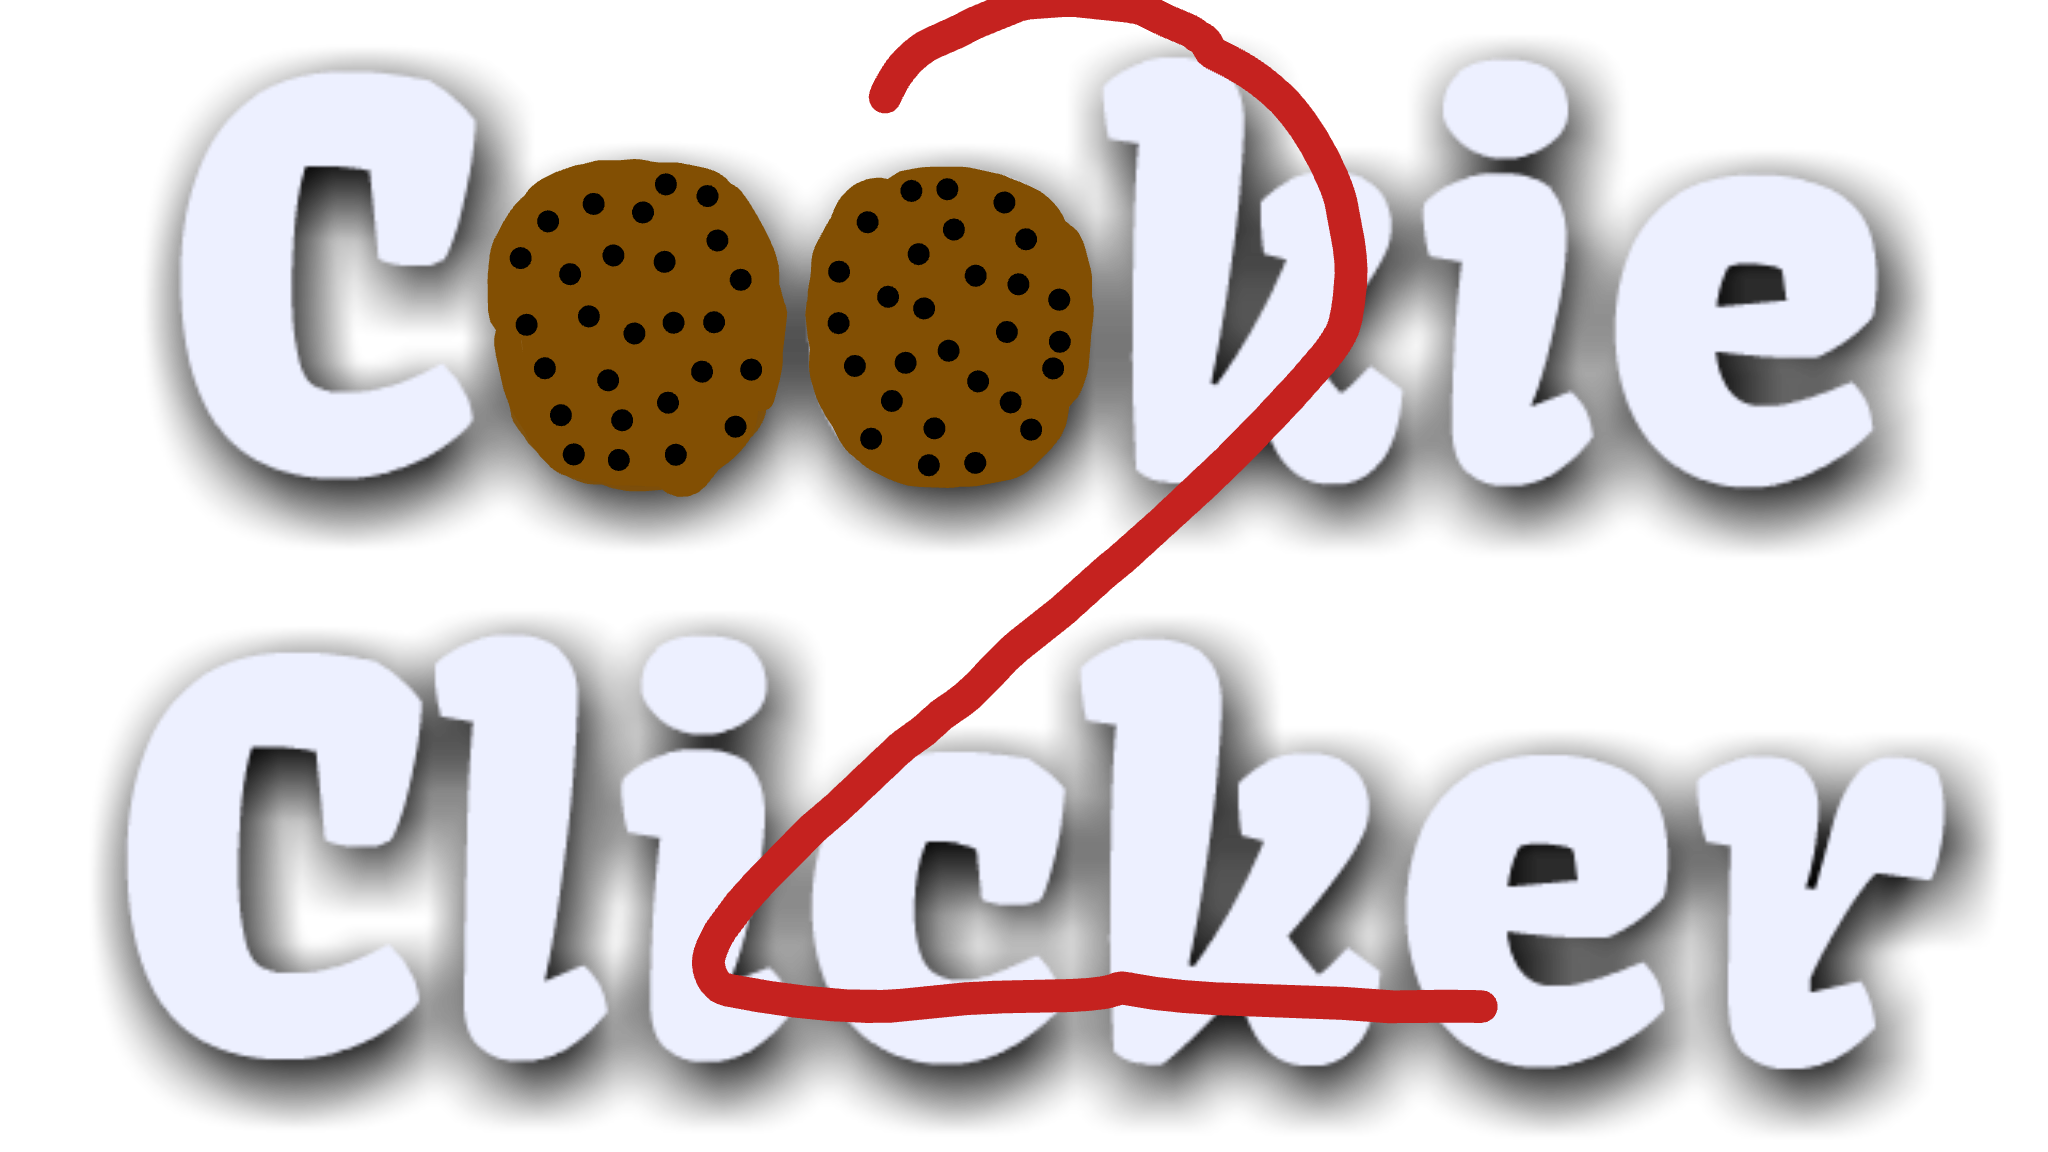 Cookie Clicker 2: The Serving Snackquel by GWDRotimi13